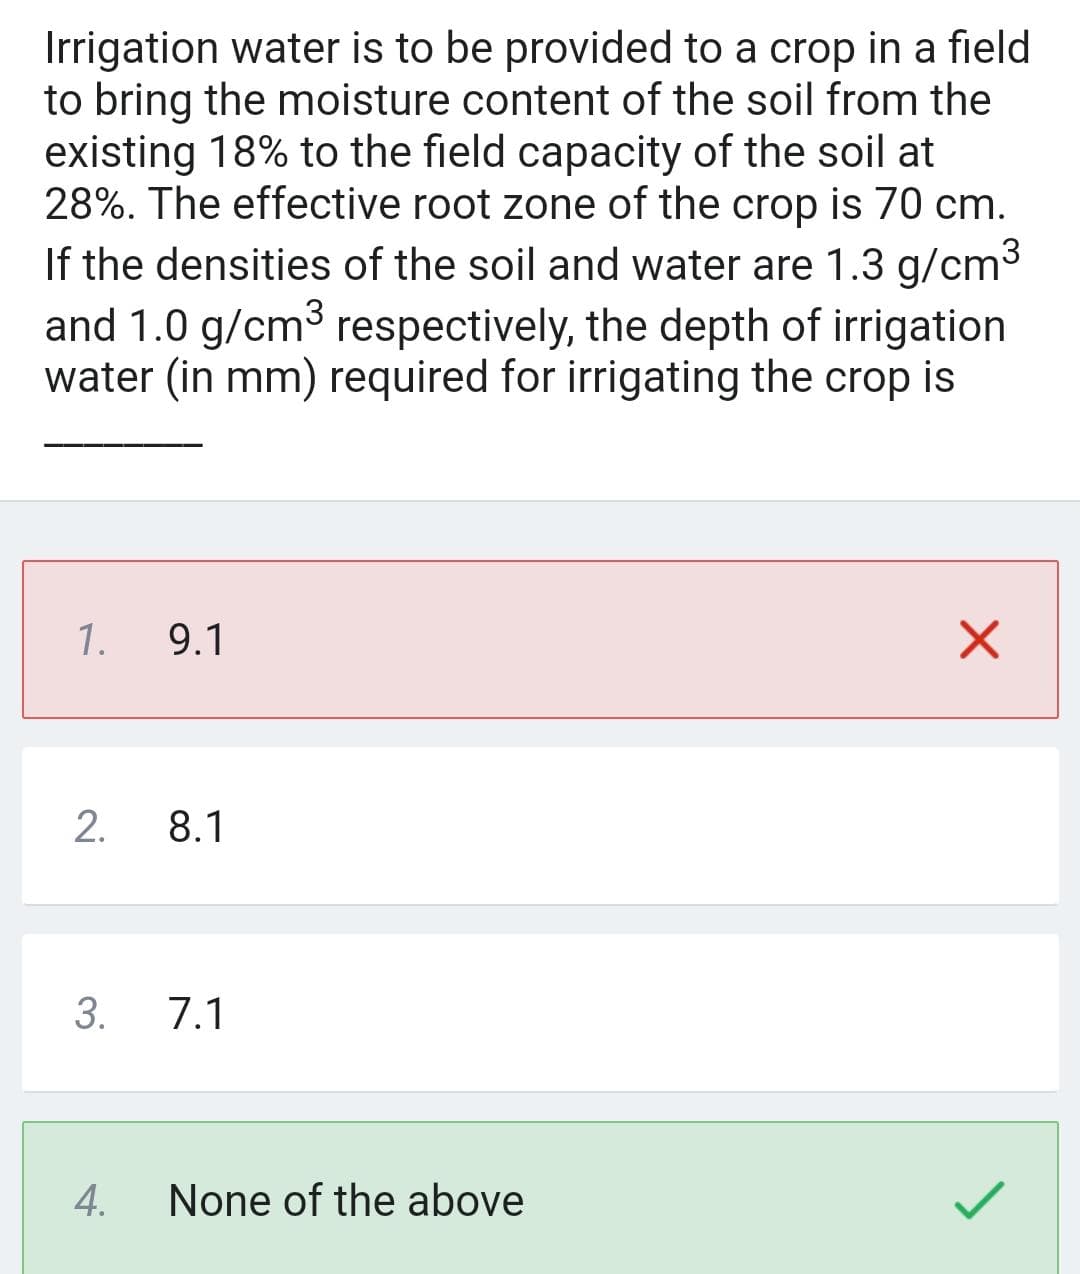 Irrigation water is to be provided to a crop in a field
to bring the moisture content of the soil from the
existing 18% to the field capacity of the soil at
28%. The effective root zone of the crop is 70 cm.
If the densities of the soil and water are 1.3 g/cm³
and 1.0 g/cm³ respectively, the depth of irrigation
water (in mm) required for irrigating the crop is
1.
9.1
2. 8.1
3. 7.1
4.
None of the above
X